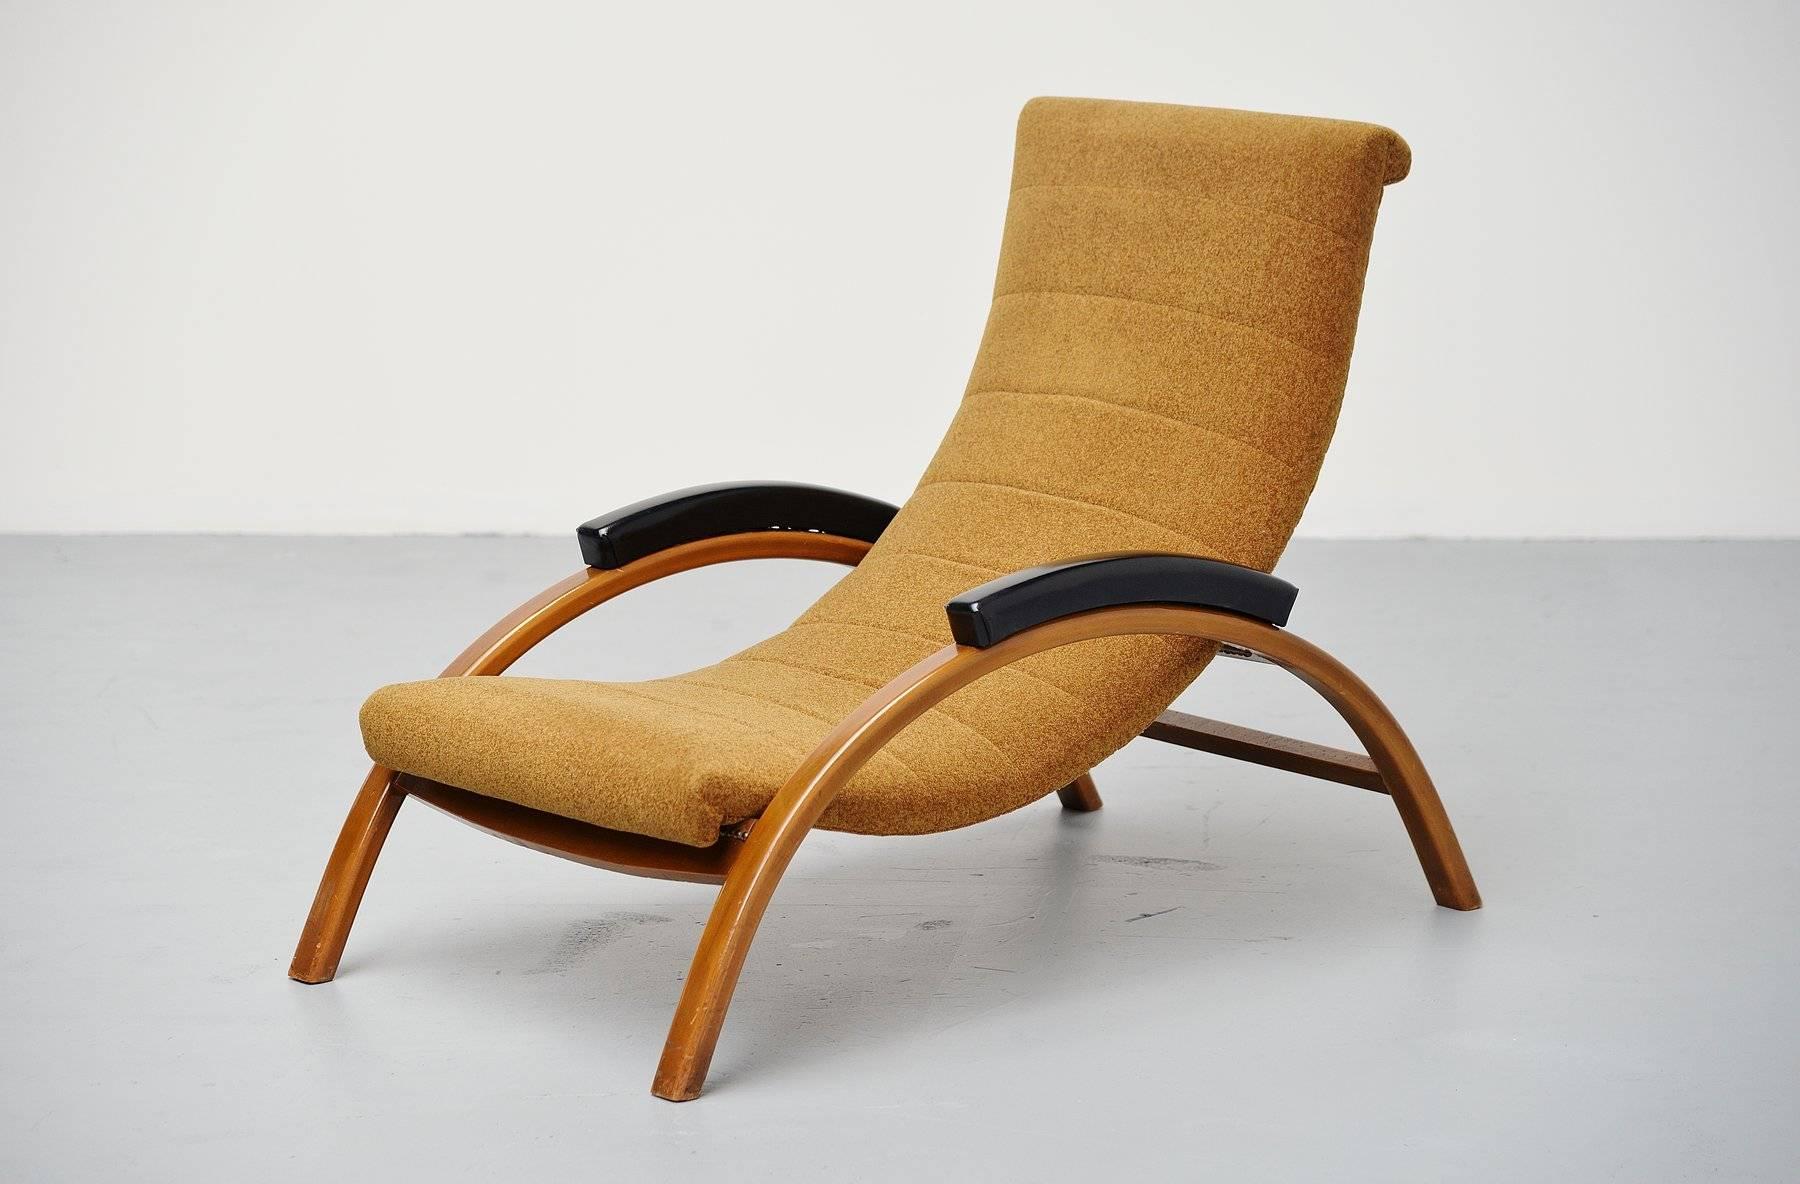 Lacquered Unusual Italian Lounge Chair Adjustable, 1950